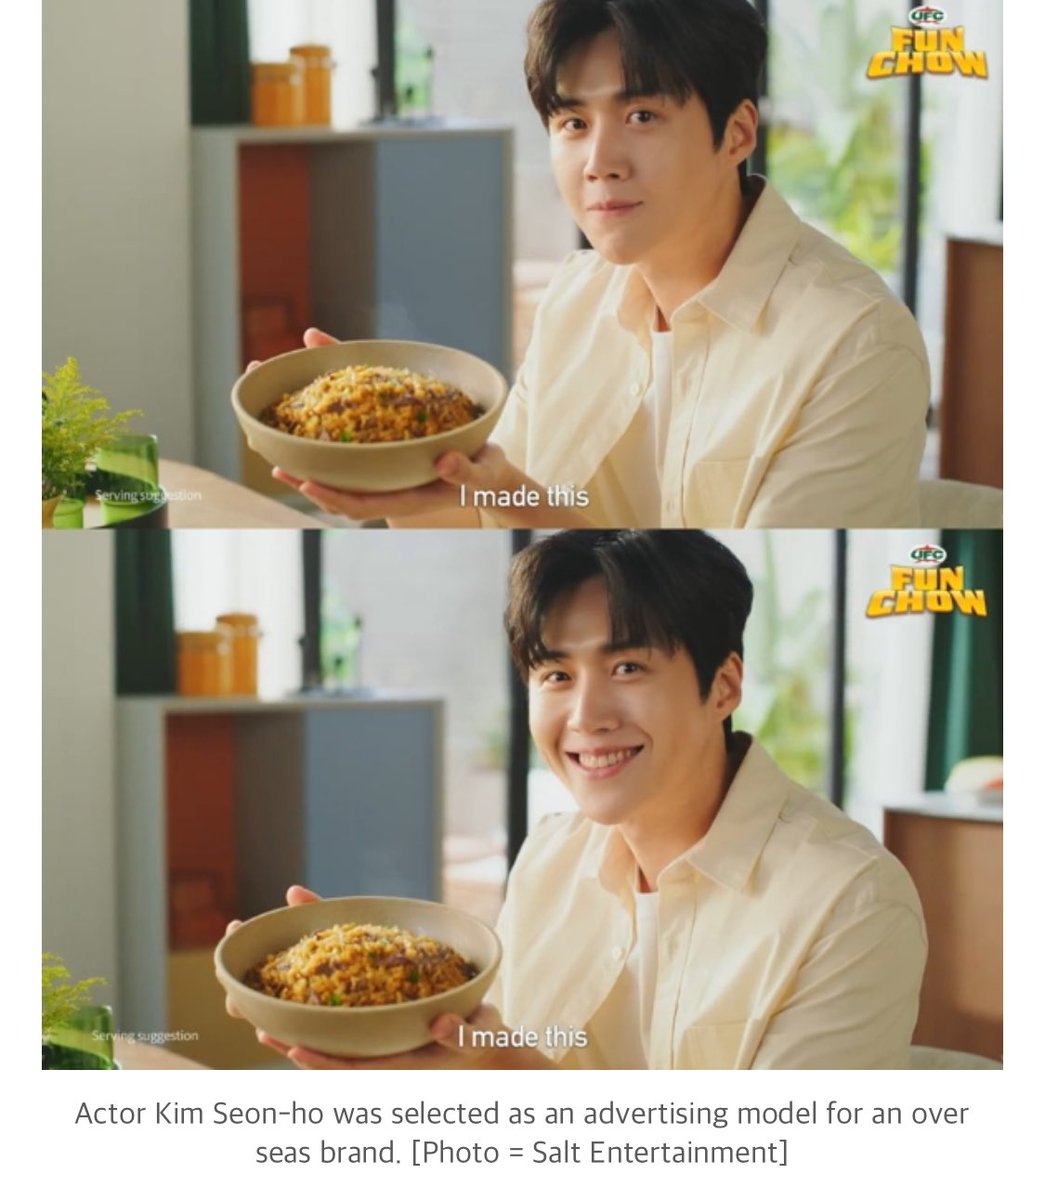 “UFC said, 'We are very happy to be able to collaborate with Kim Seon-ho, a beloved star and multi-talented person in Korea, and model for his first Filipino food brand.'” 🔗 m.joynews24.com/v/1724585 #김선호 #KimSeonho #คิมซอนโฮ #キムソンホ